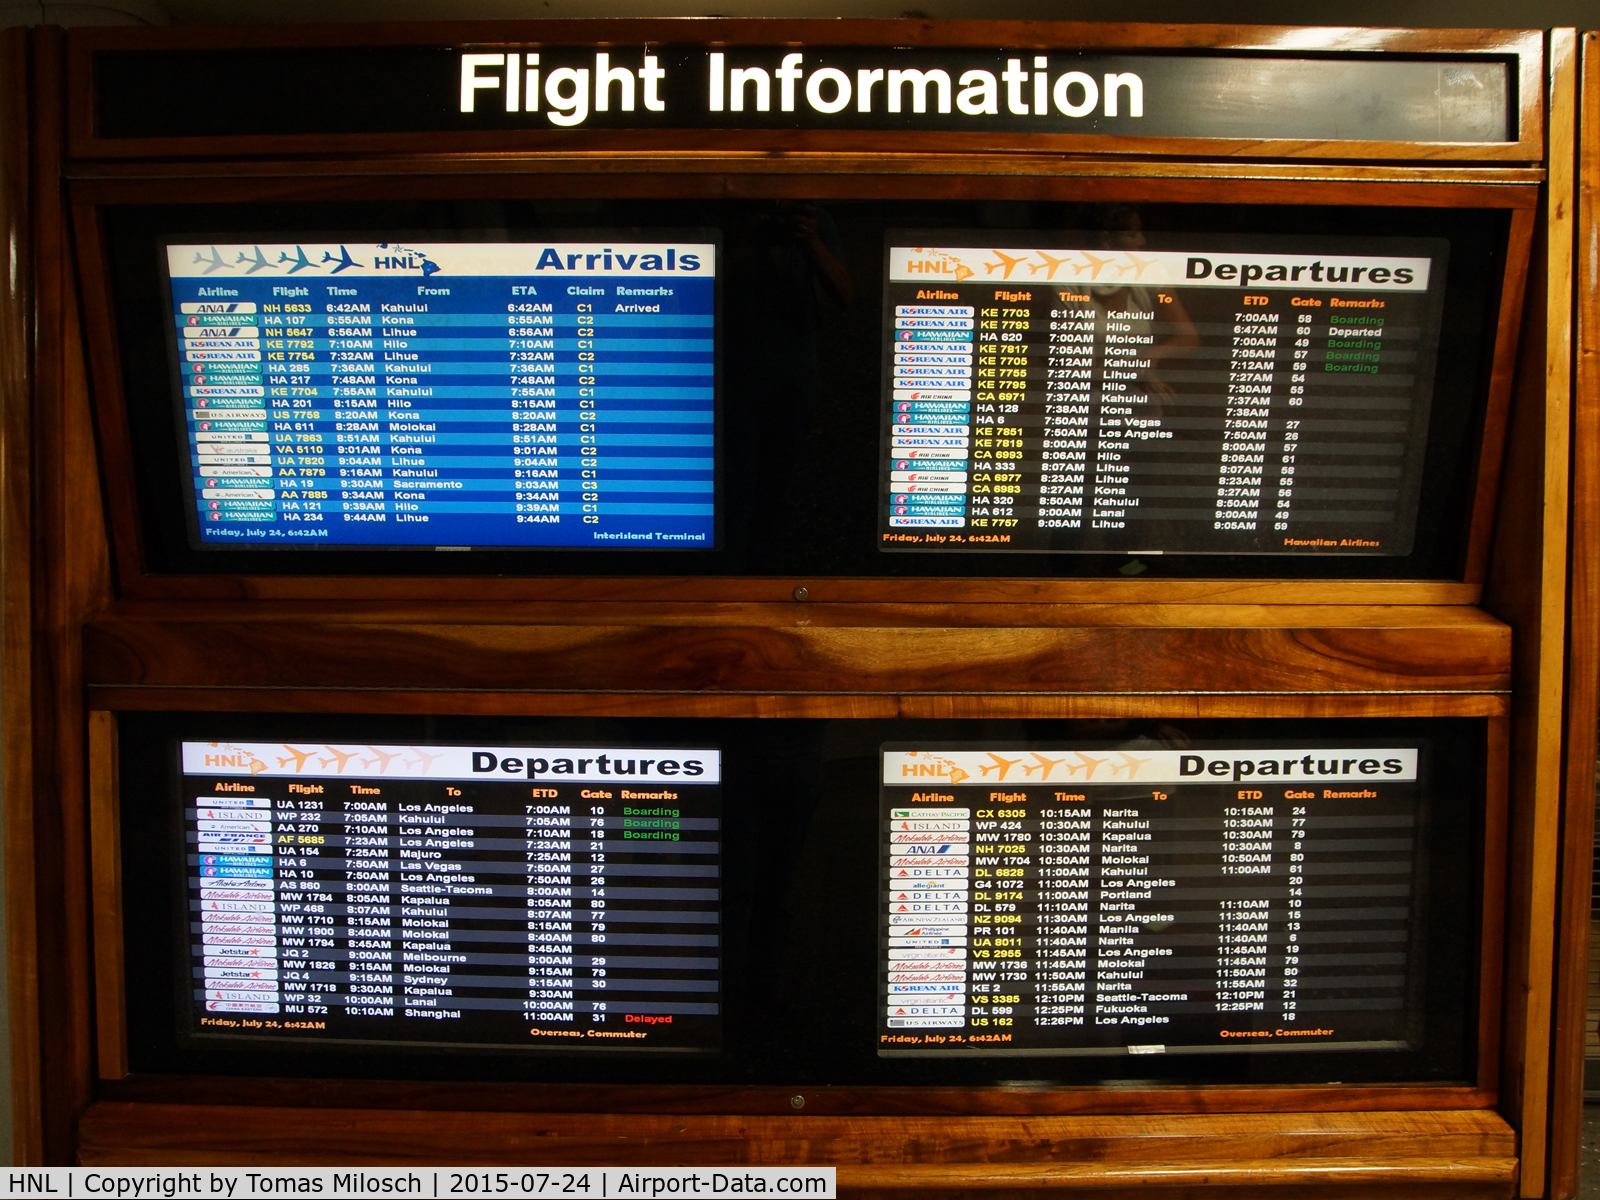 Honolulu International Airport (HNL) - Lots of code share flights among alle these arrivals and departures ...